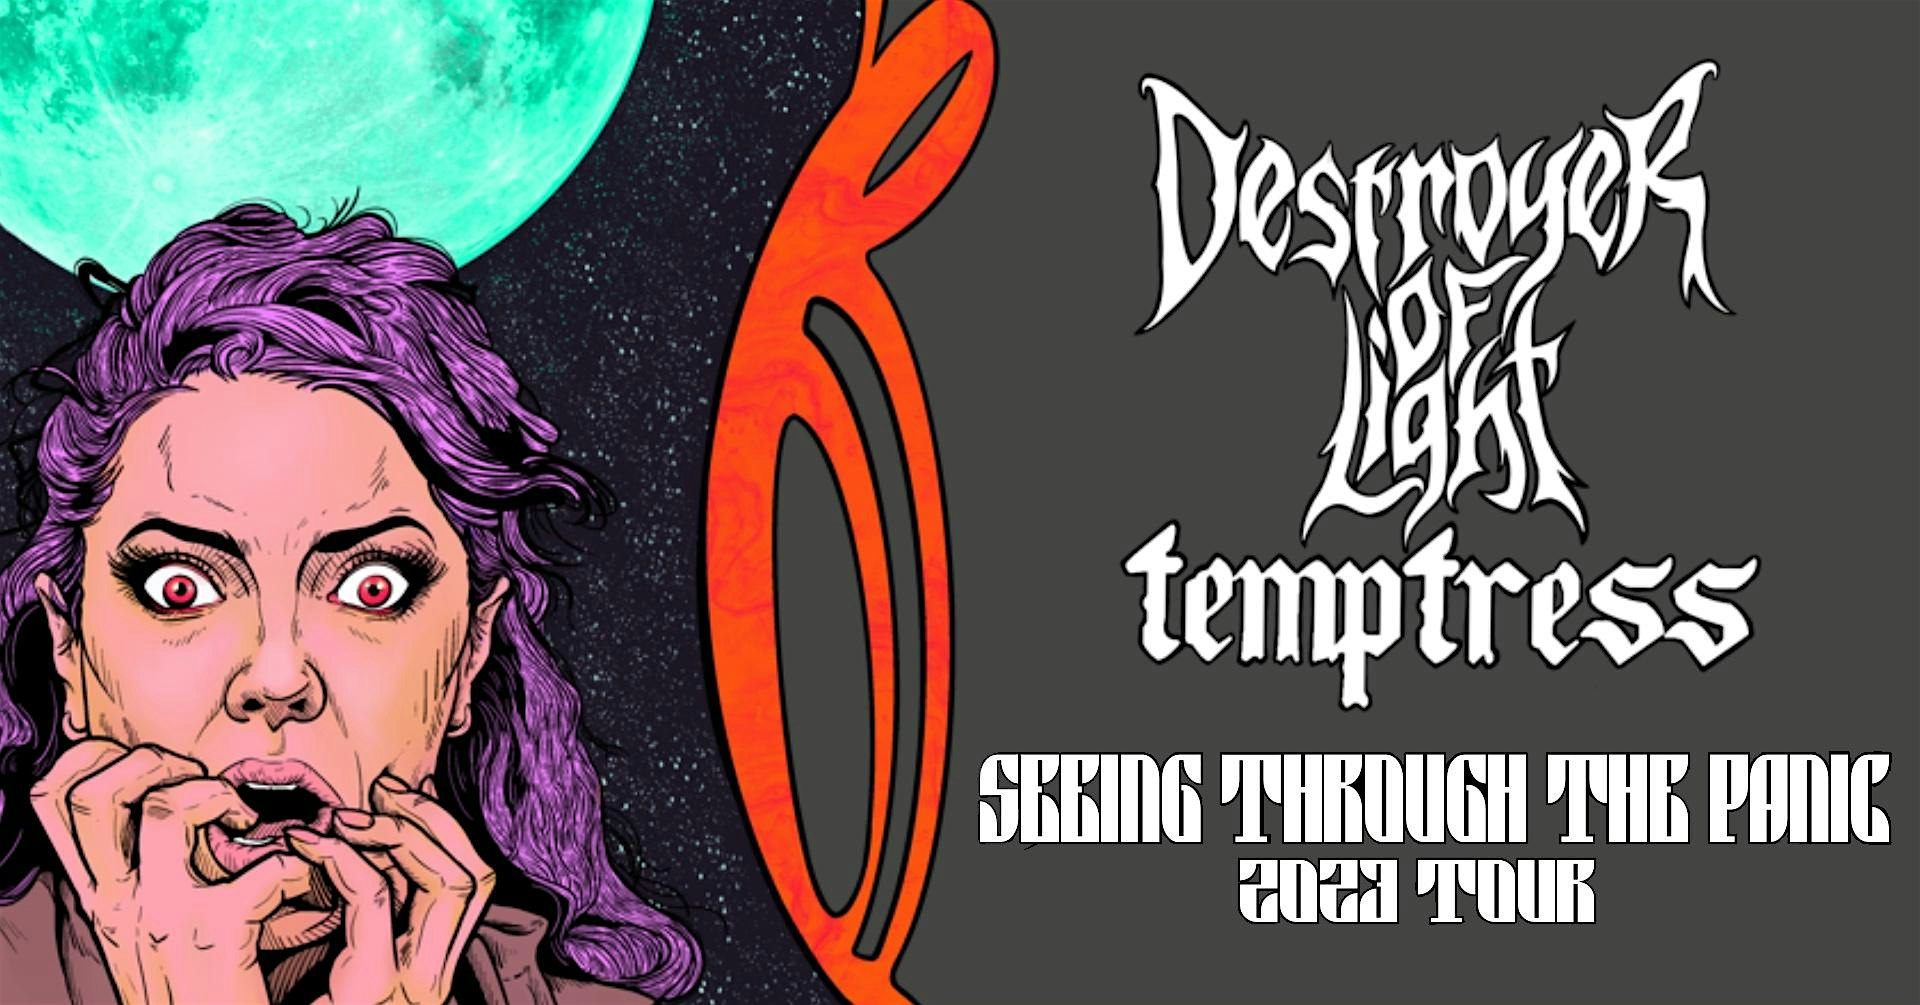 Temptress, Destroyer of Light, and More in Orlando at Will's Pub